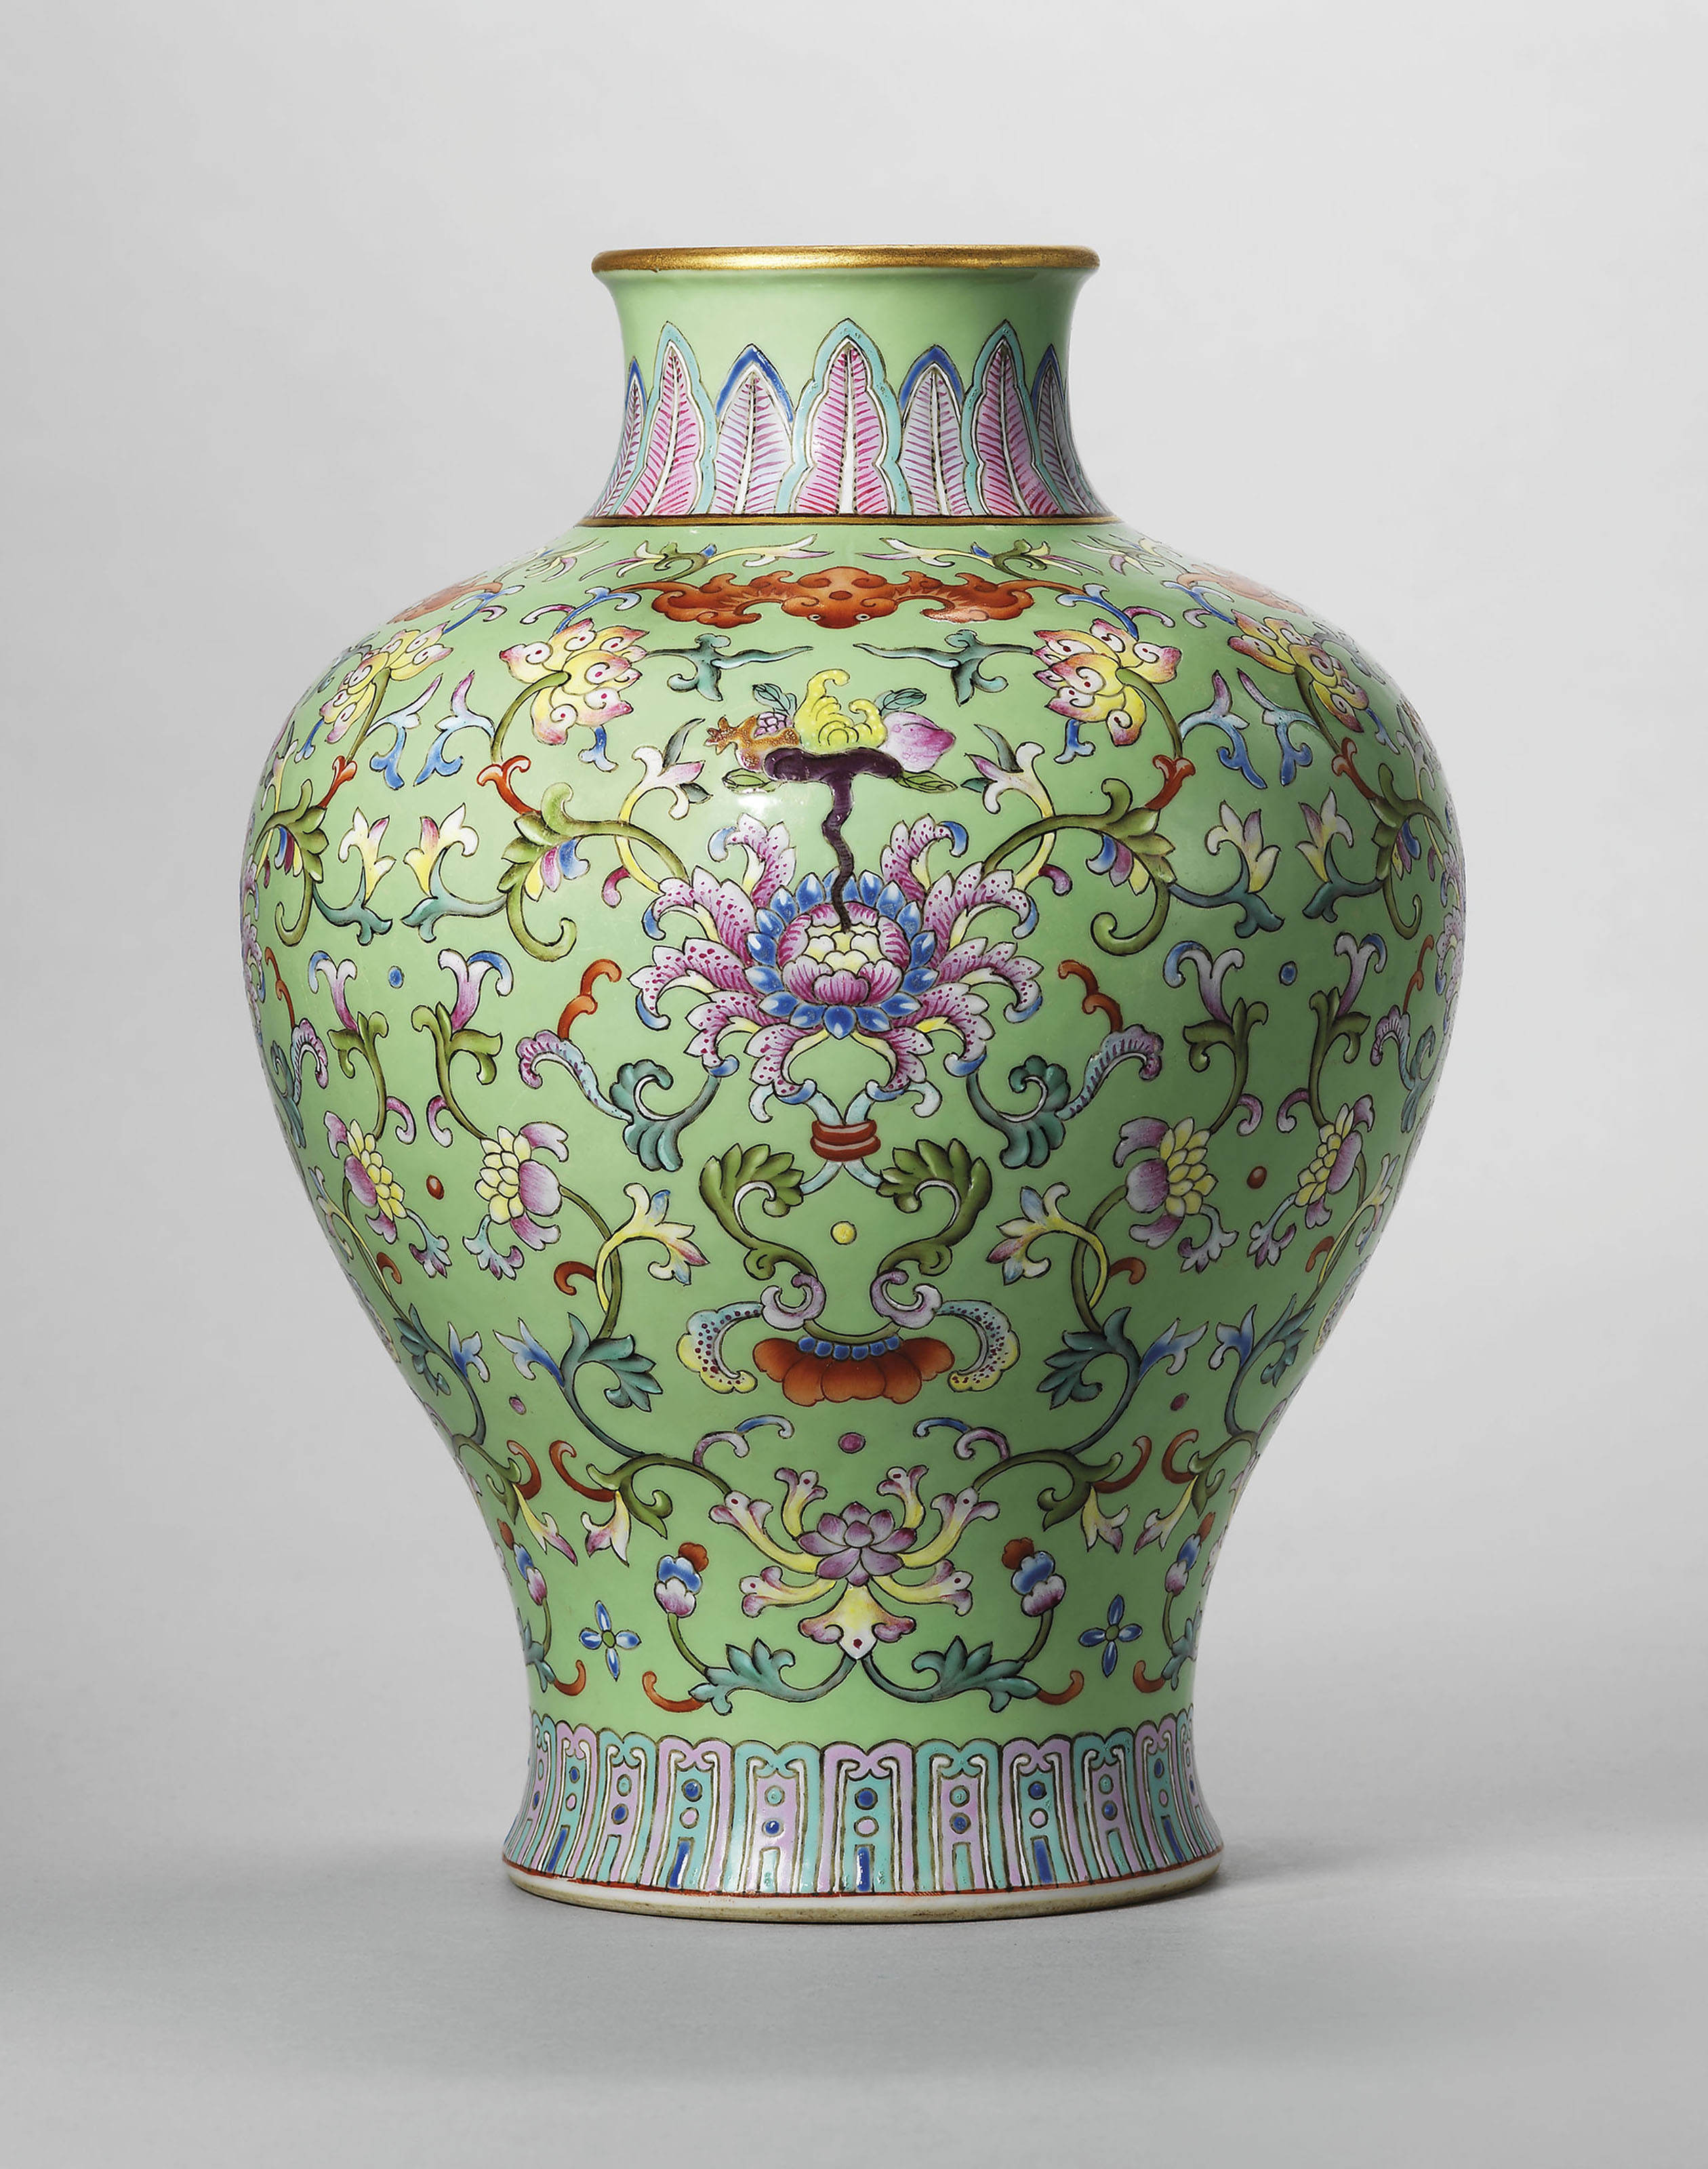 19 Lovely Antique Chinese Glass Vase 2024 free download antique chinese glass vase of a guide to the symbolism of flowers on chinese ceramics christies in a lime green ground famille rose vase meiping qianlong six character seal